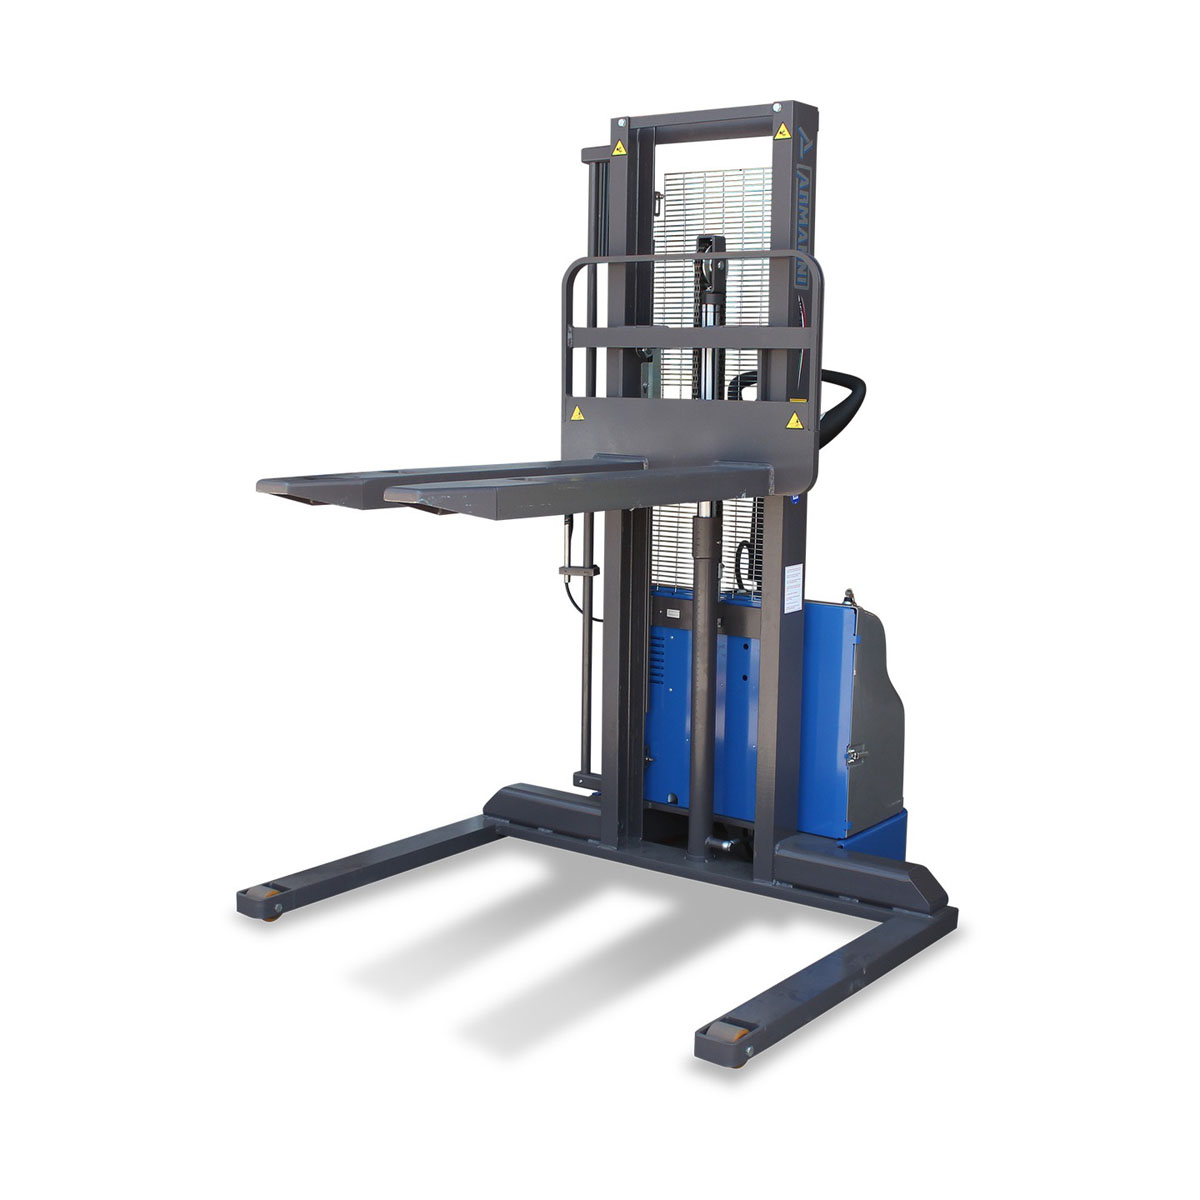 Buy Electric Straddle Stacker (Auto-levelling) in Pallet Stackers from Armanni available at Astrolift NZ